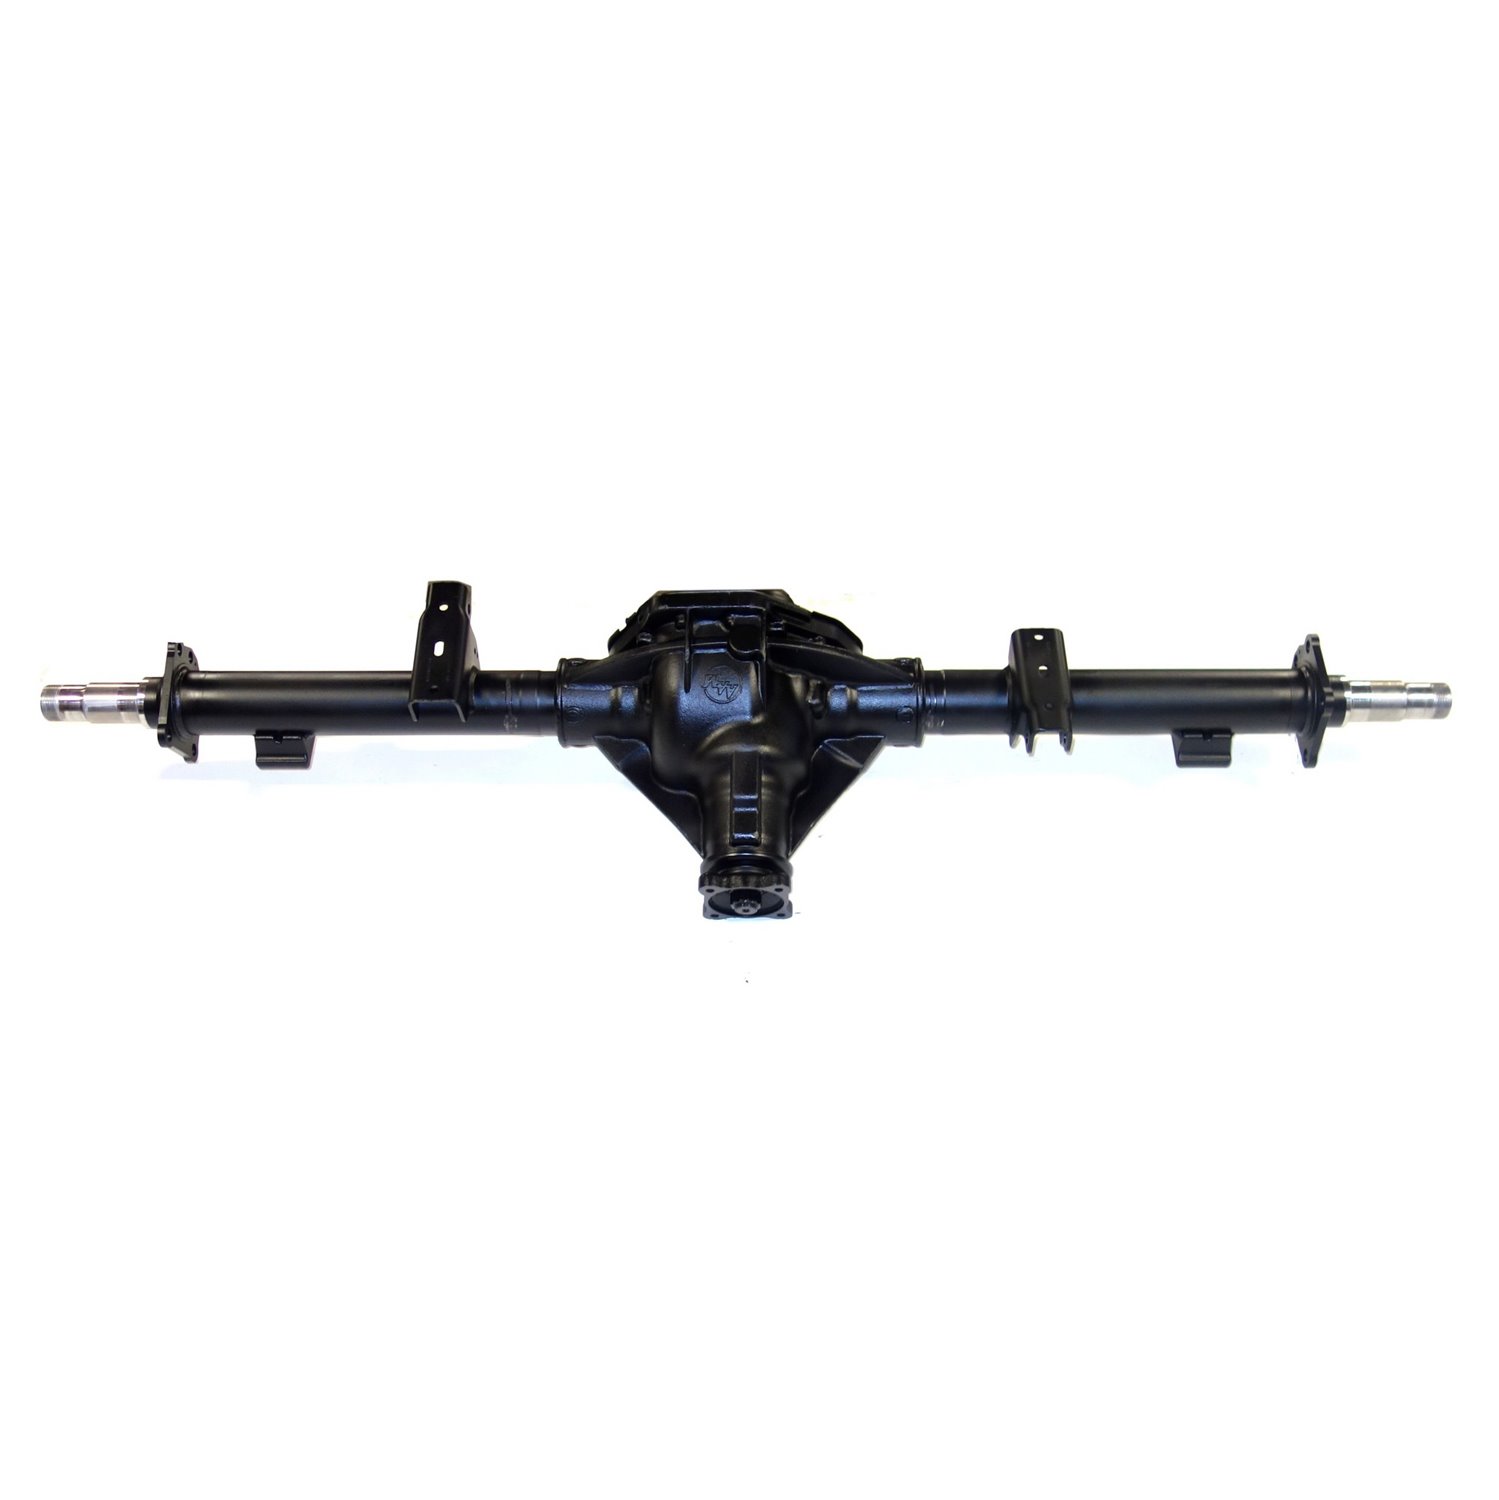 Remanufactured 10.5" AXLE ASSY '06-'08 RAM 1500 MEGA CAB, 2500 (EXC POWER WAGON), 3.73, 4WD